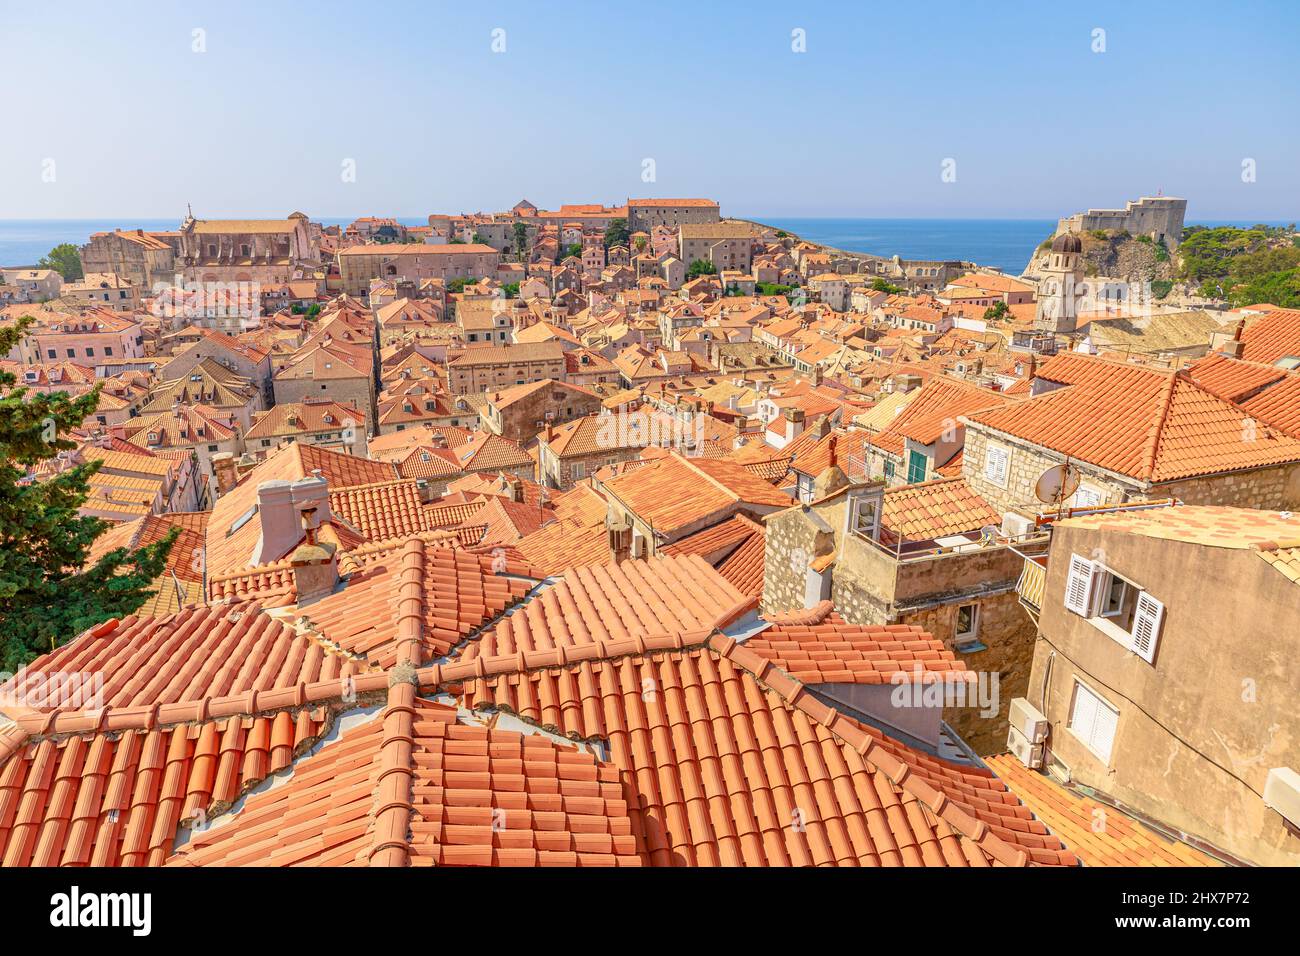 Aerial view on Dubrovnik post in Croatia. View of Cathedral of the Assumption of the Virgin Mary and church Crkva sv. Vlaho Saint Biagio of Dubrovnik Stock Photo